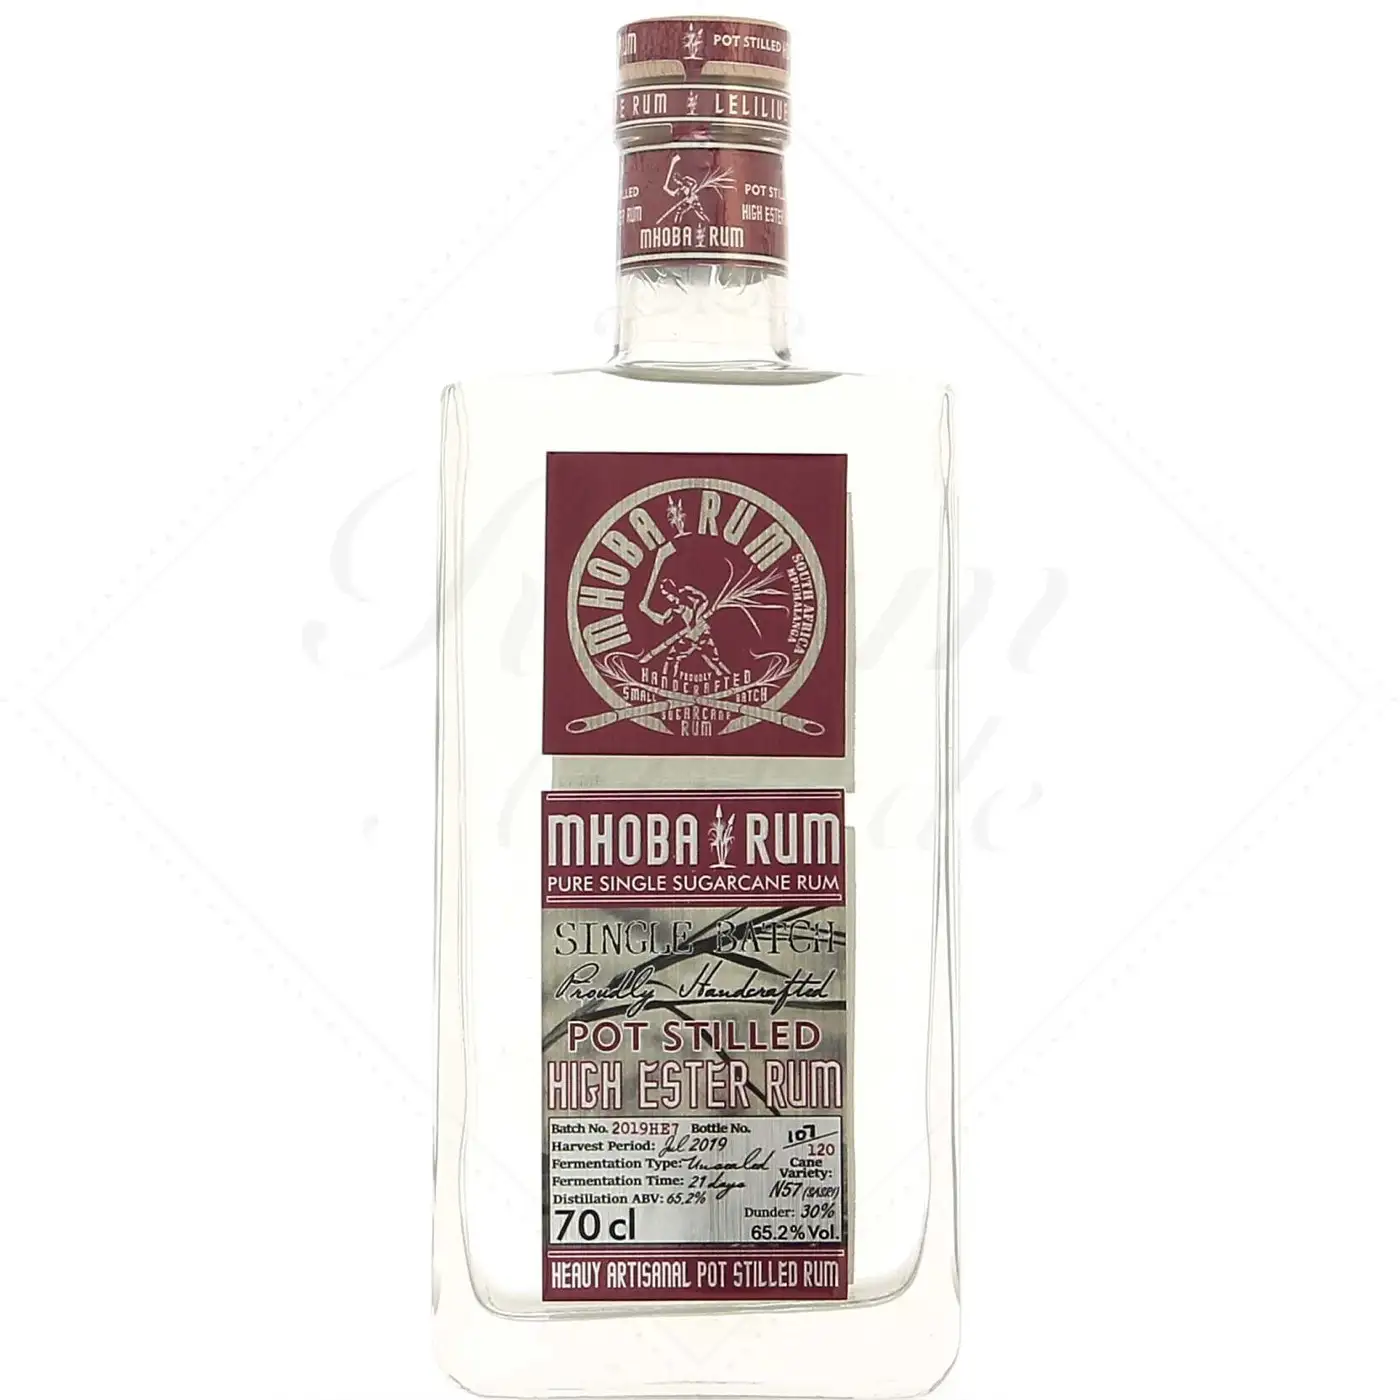 Image of the front of the bottle of the rum Pot Stilled High Ester Rum